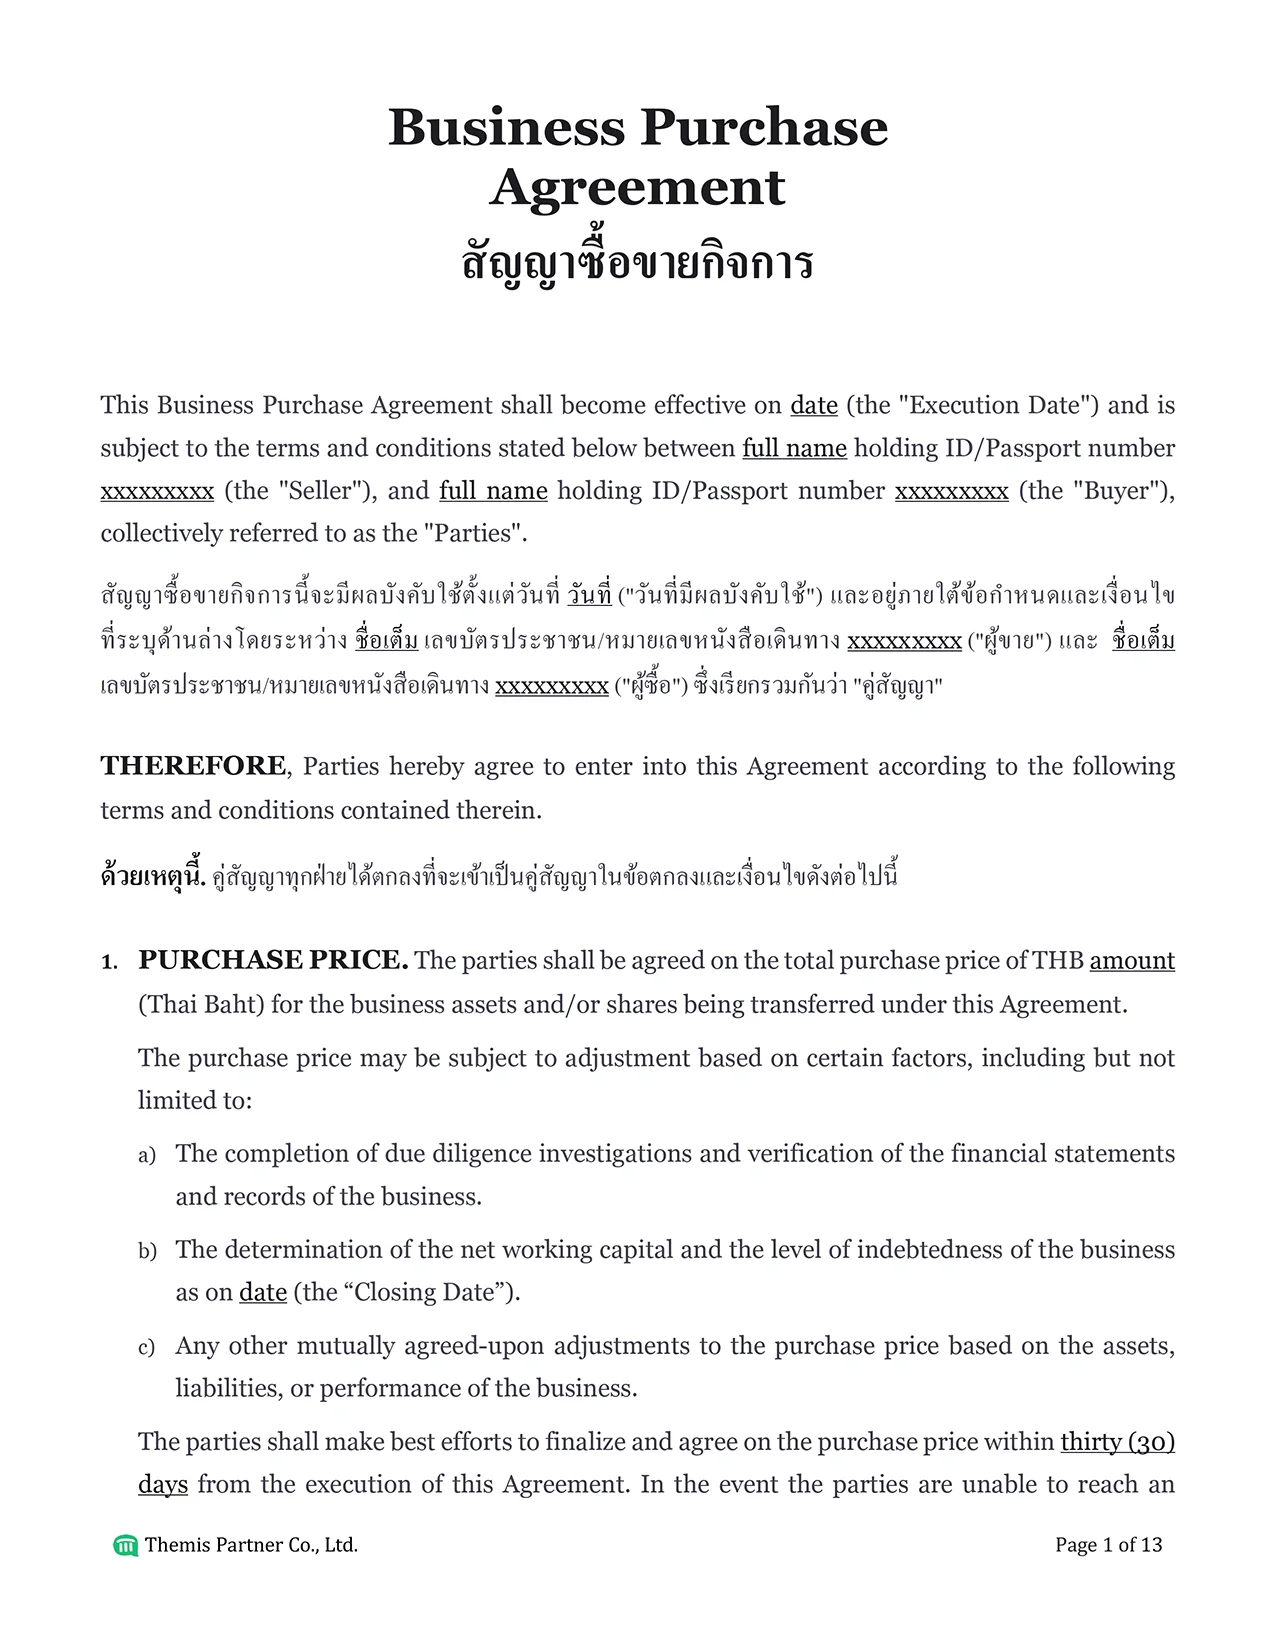 Business purchase agreement Thailand 1